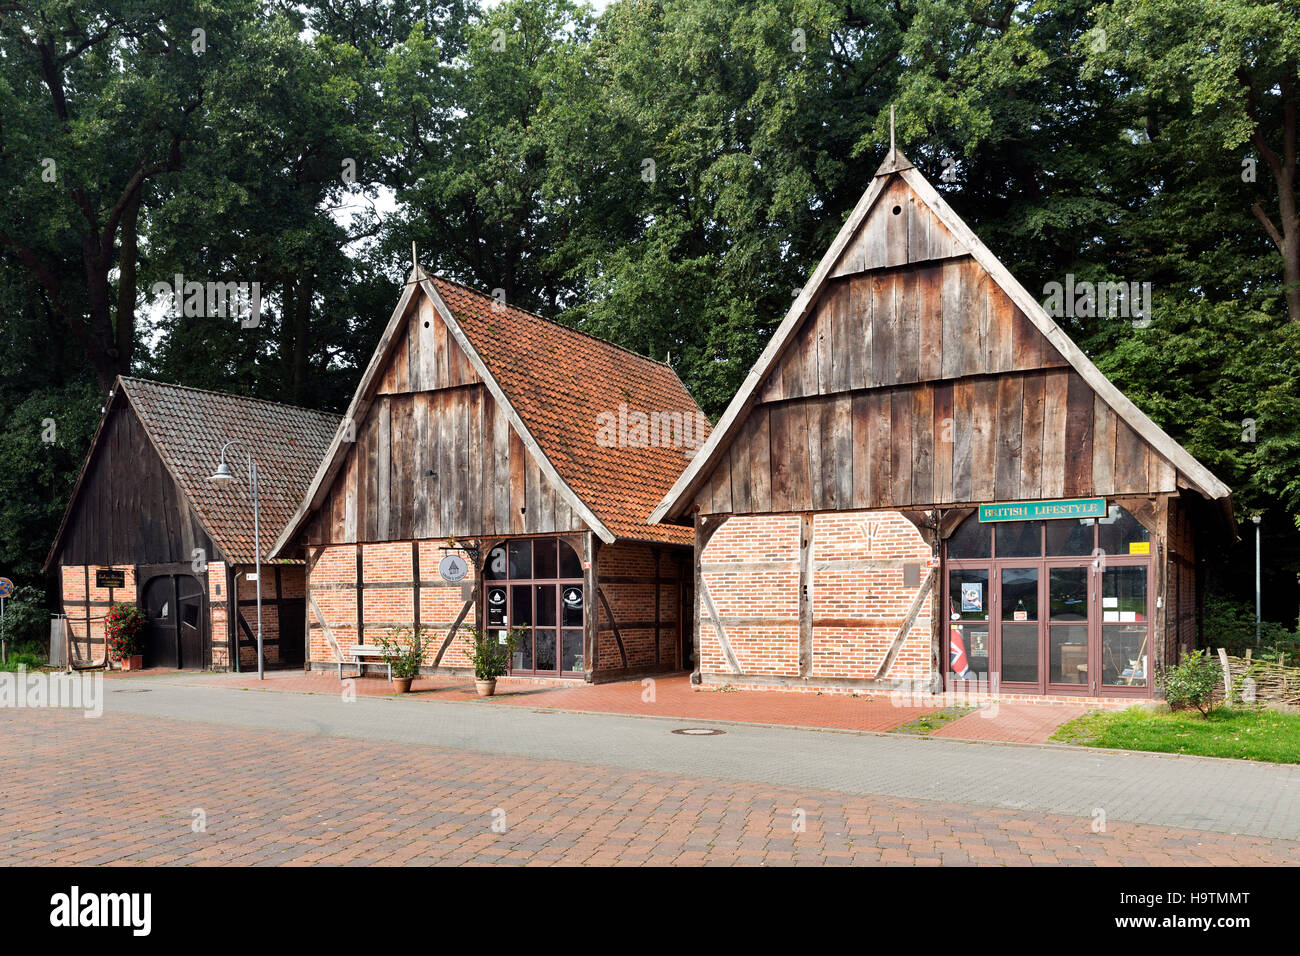 Barn district with historic barns in half-timbered style, Steinhude, Wunstorf, Lower Saxony, Germany Stock Photo